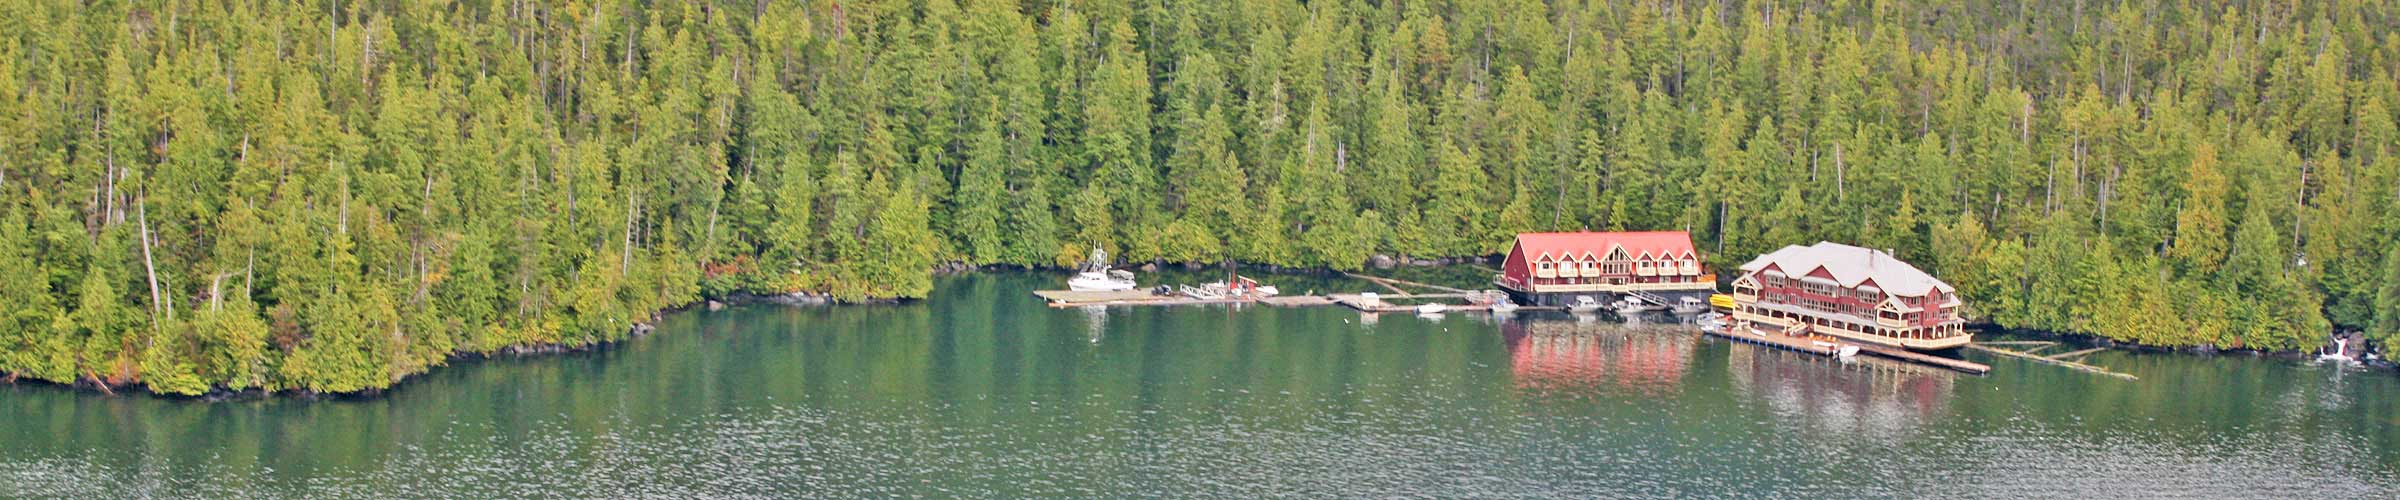 Canadian coastline with lodge on water's edge